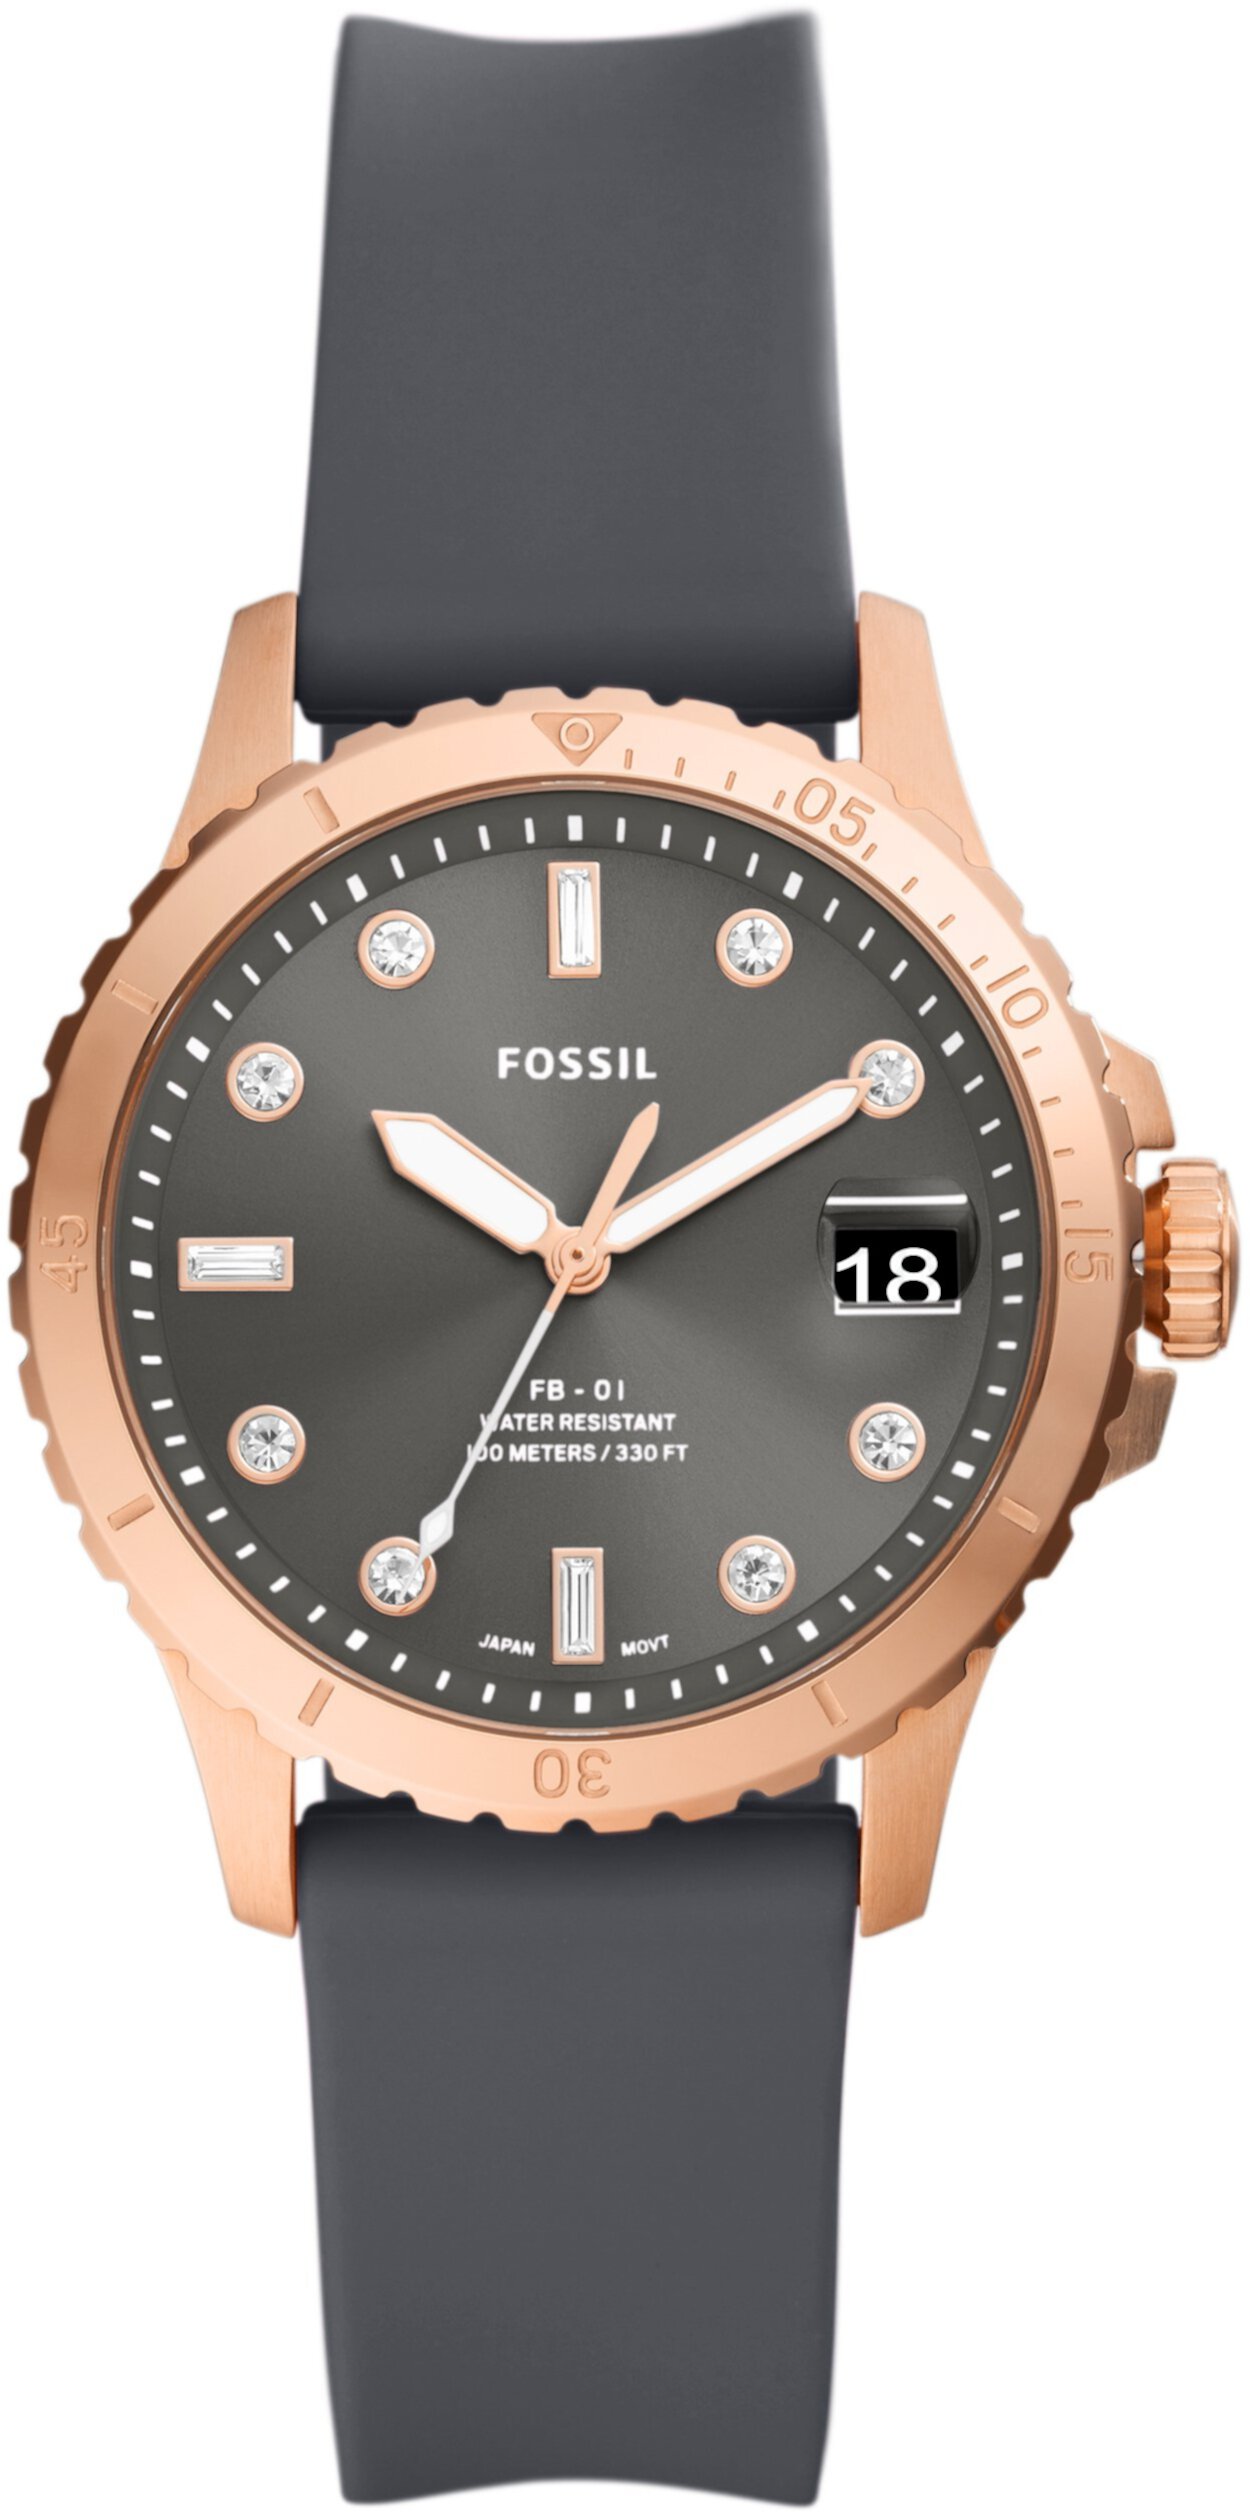 36 mm FB-01 3 Hand Date Silicone Watch ES5293 Fossil